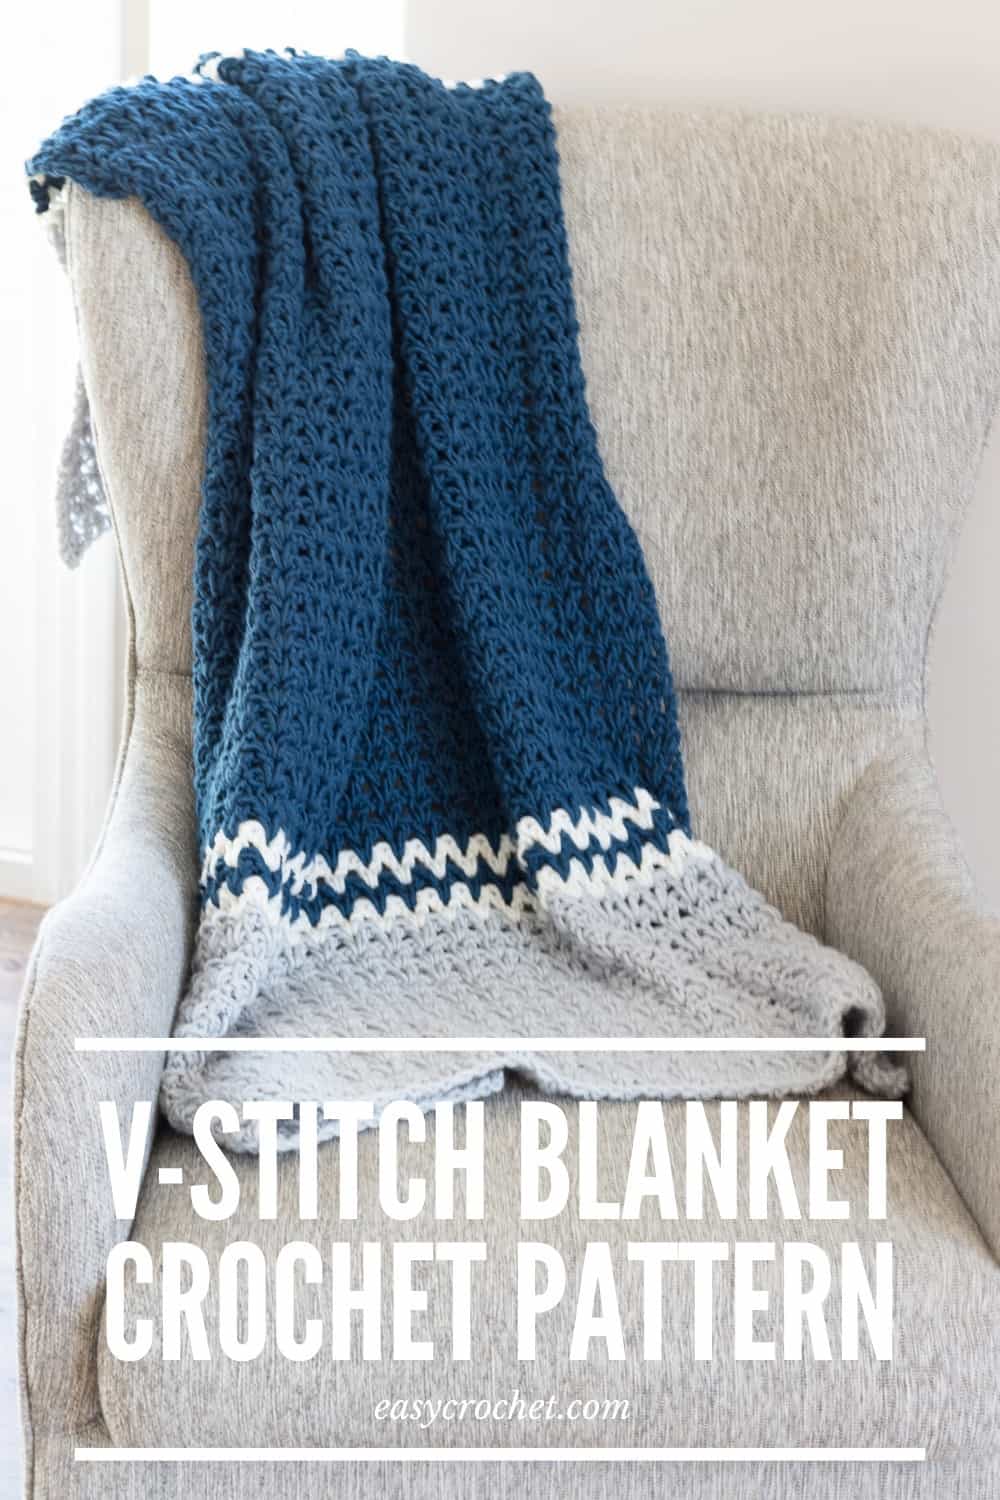 Free Crochet Blanket Pattern using the V-Stitch! This is an easy tutorial featuring the Double Crochet V Stitch! Since this is great for all skill levels even beginners can do it! Find the free pattern at easycrochet.com Pin to Make Later or Open now to start today! via @easycrochetcom